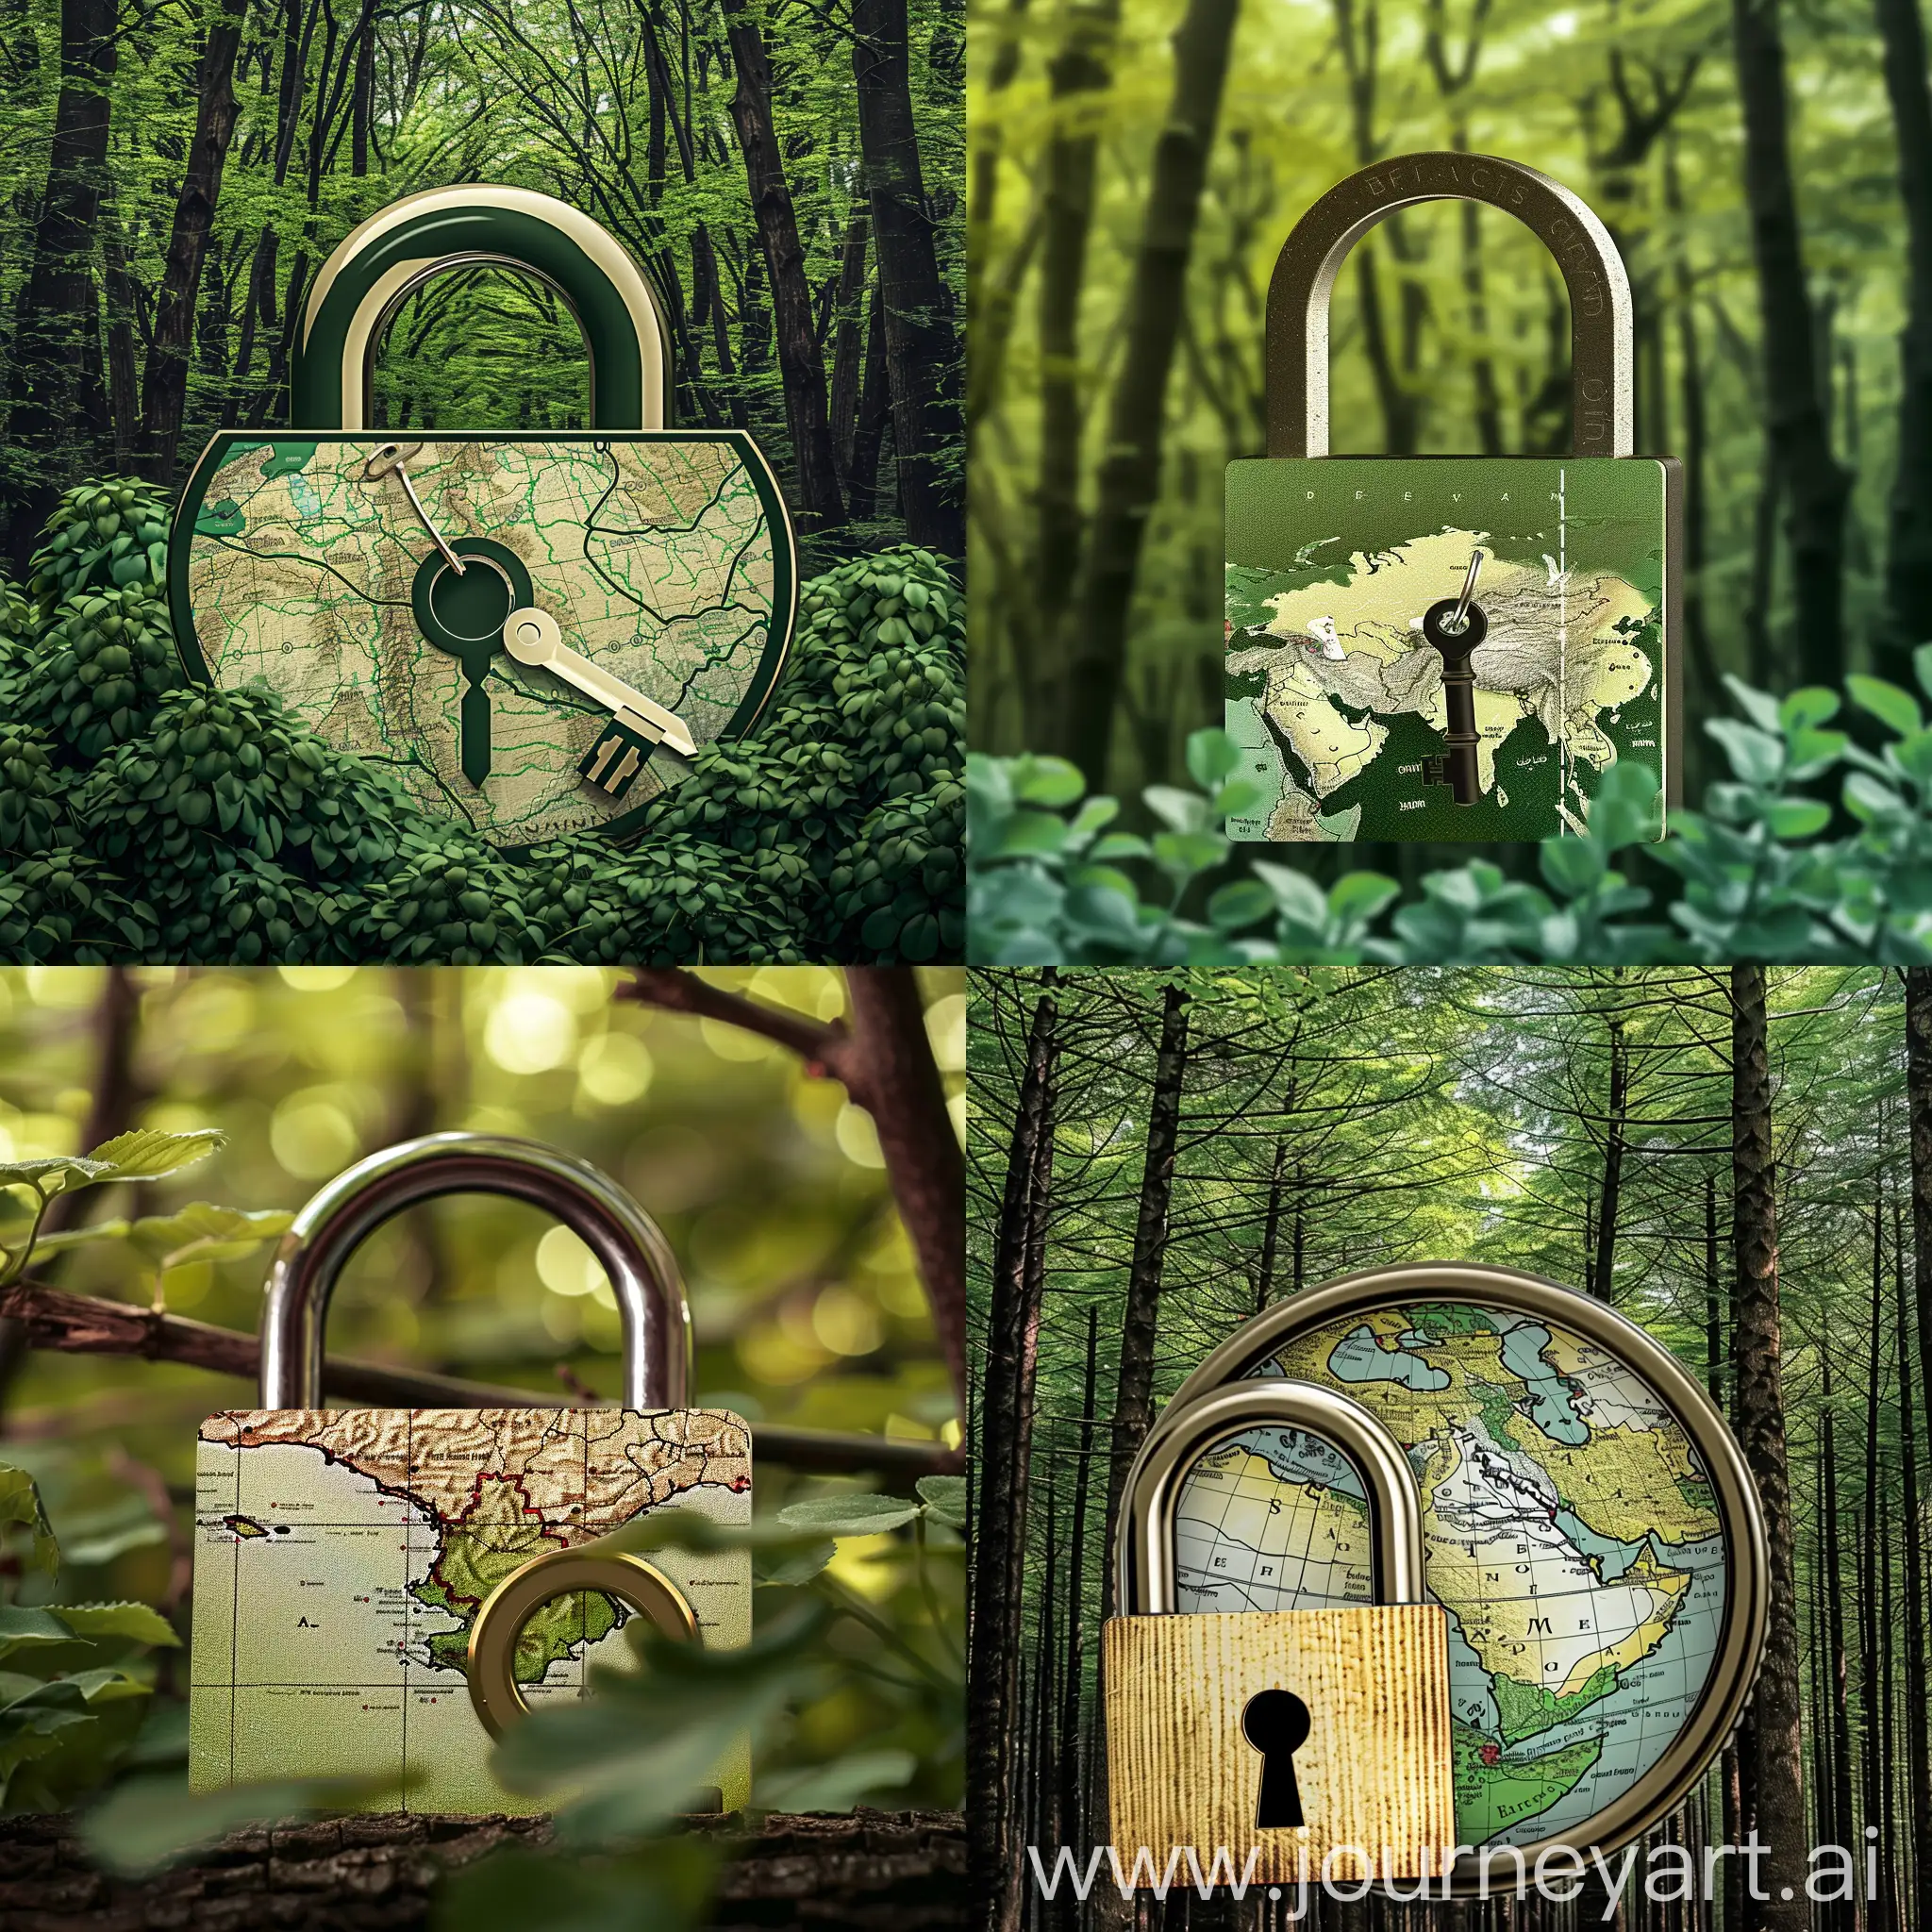 Secure-VPN-Access-with-Key-Lock-in-Lush-Green-Setting